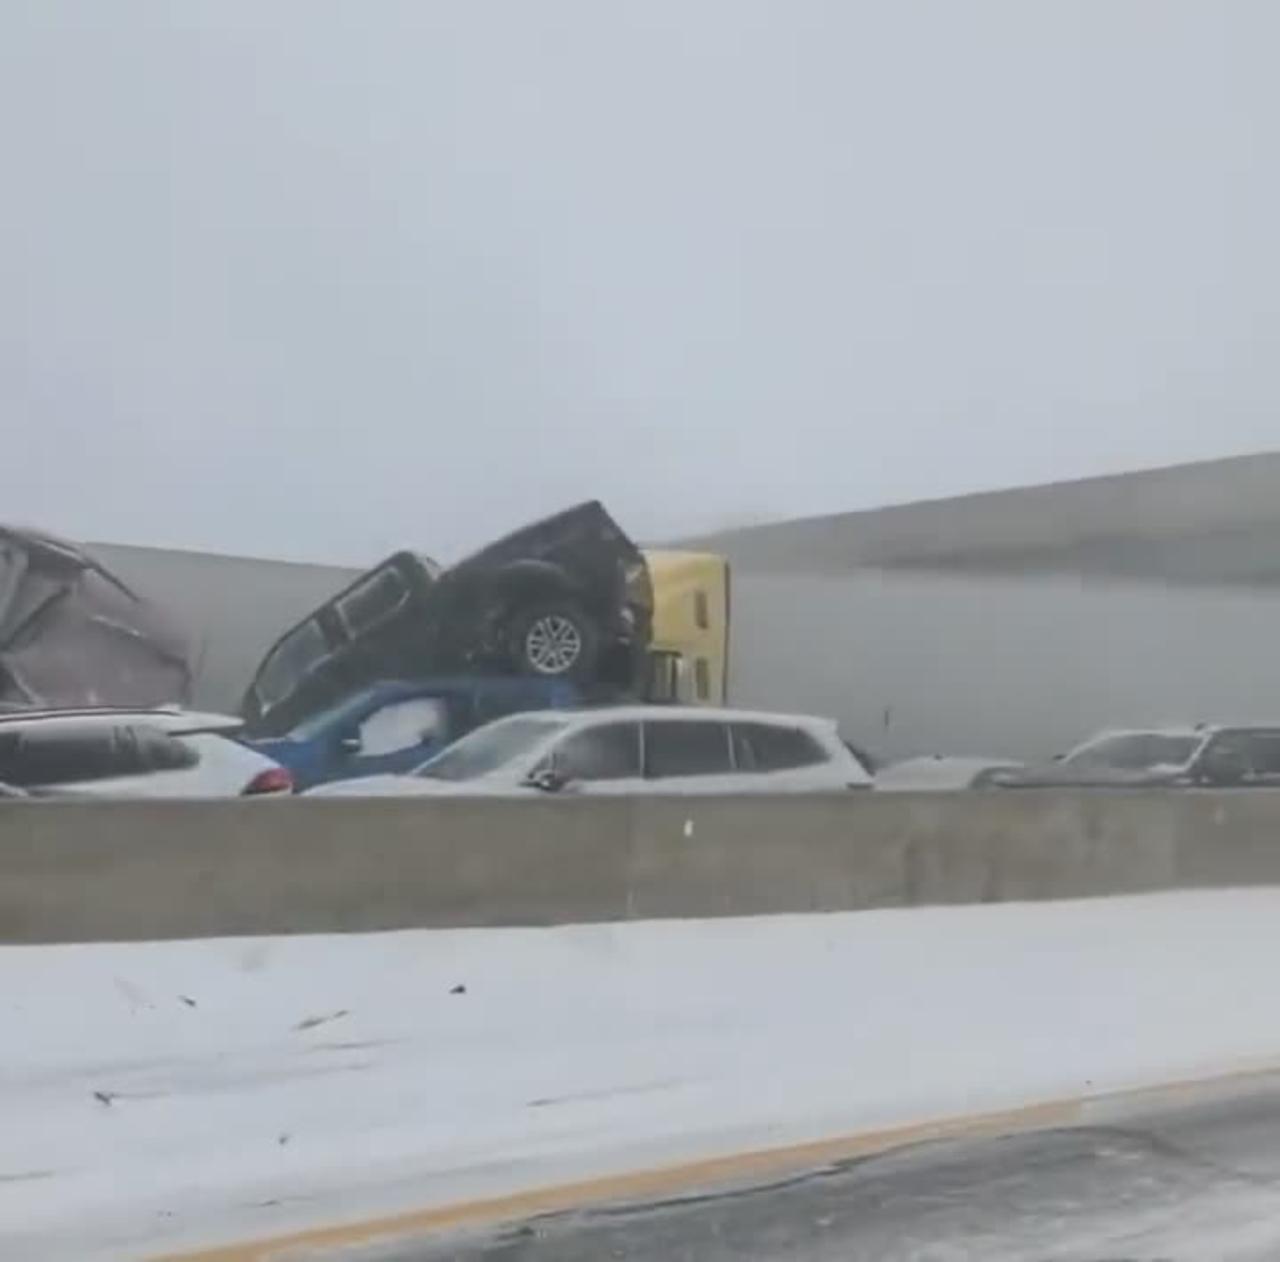 Mass Casualty Incident’ declared following pileup on Interstate 75 in Ohio